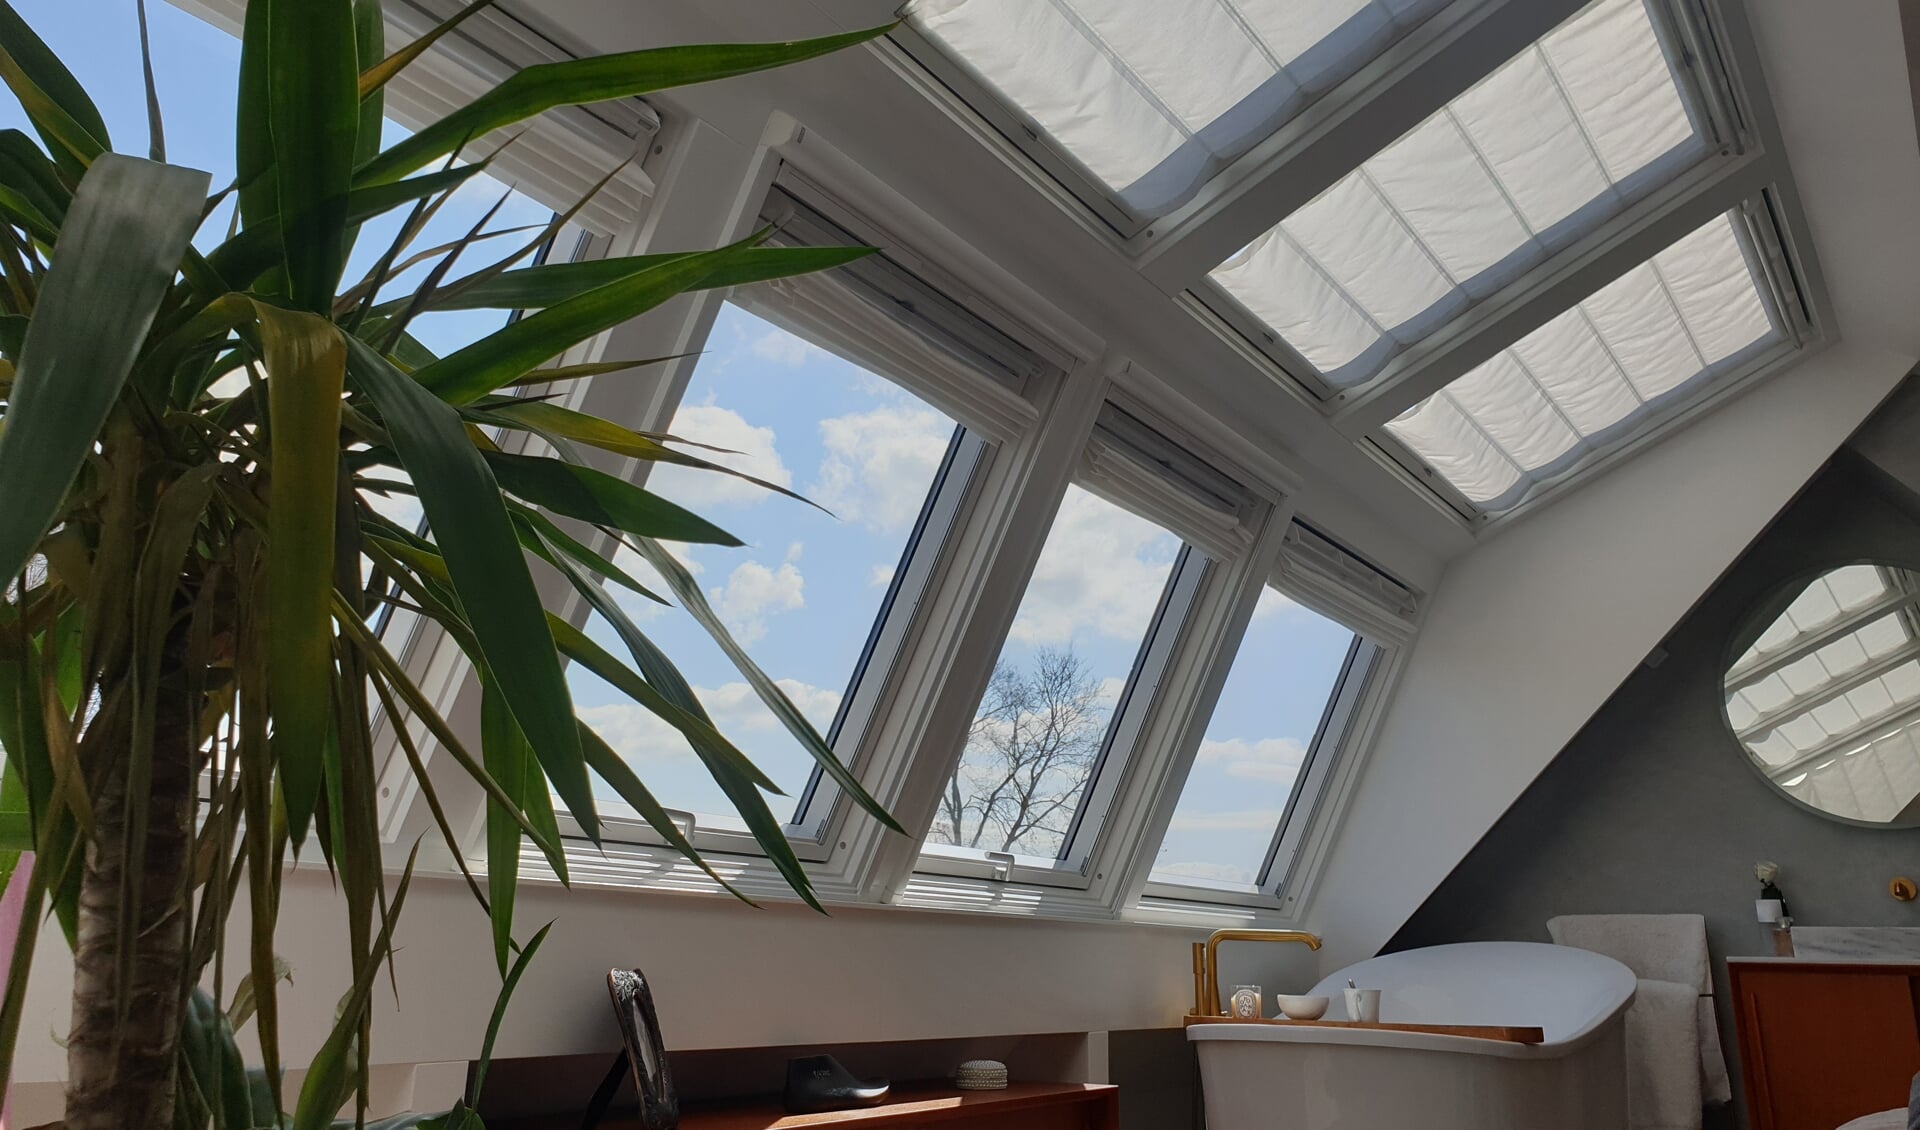 The angled position of the skylights provides more light